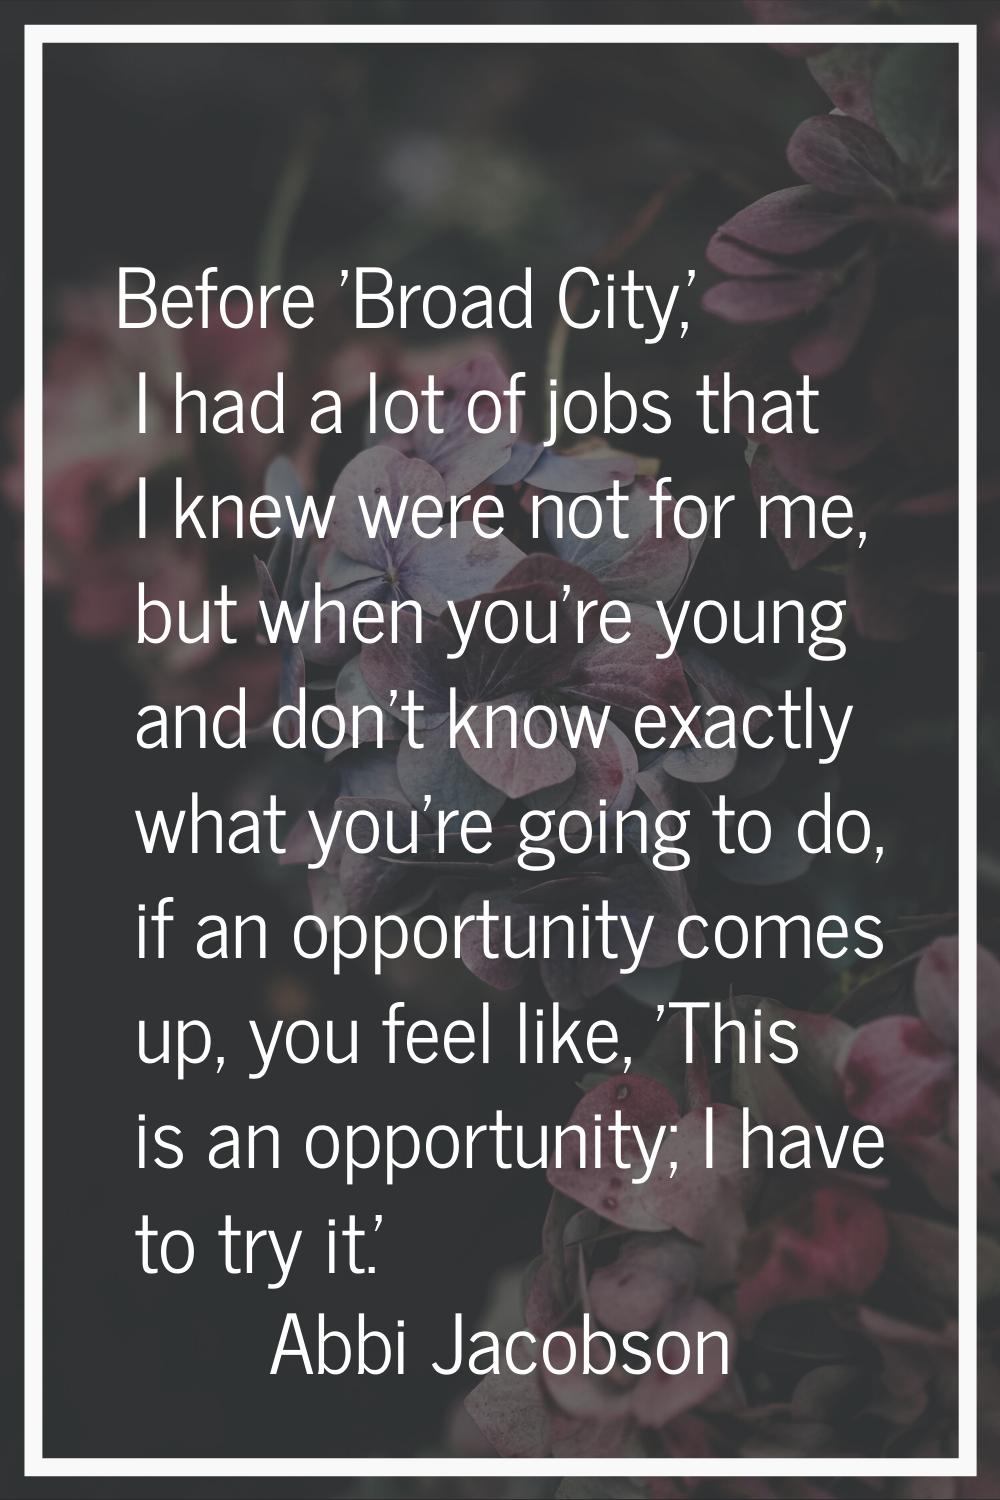 Before 'Broad City,' I had a lot of jobs that I knew were not for me, but when you're young and don